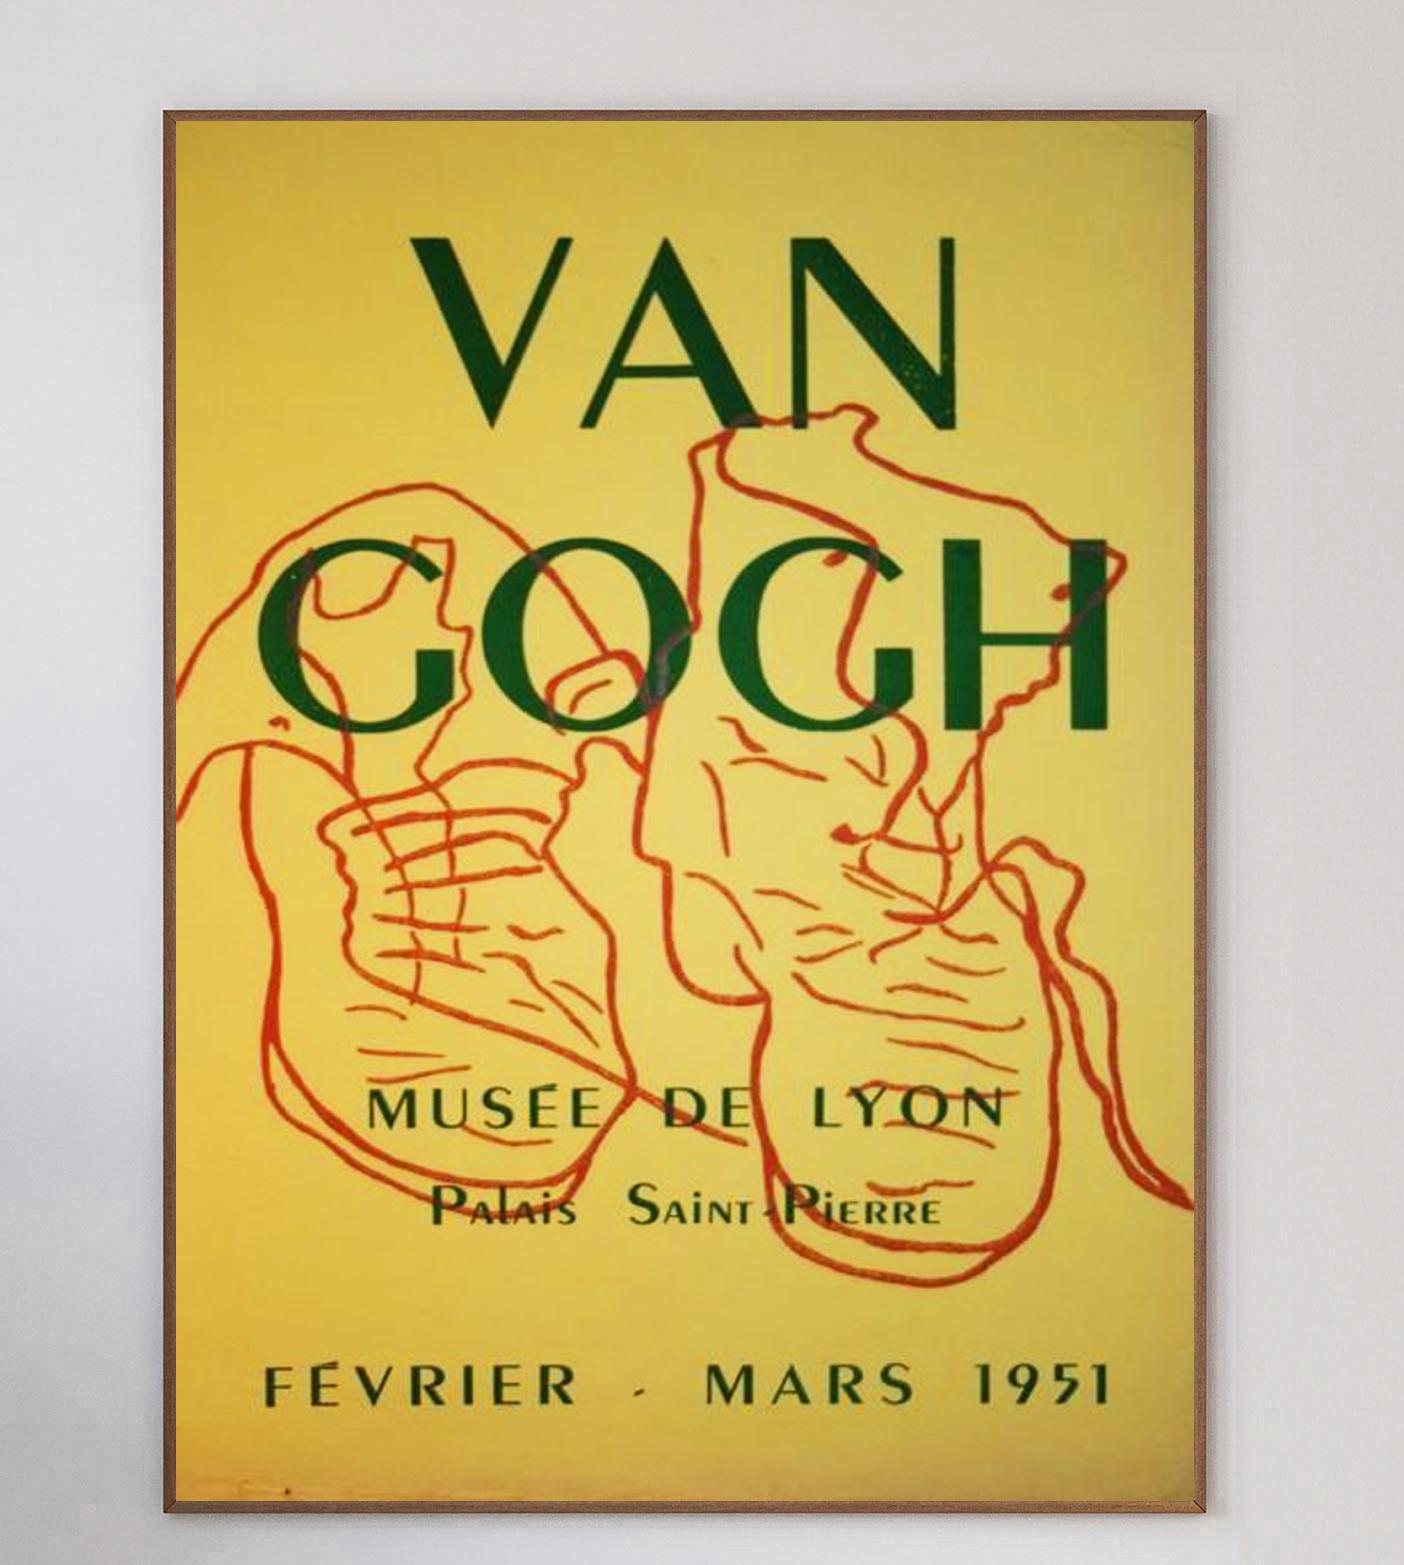 Beautiful poster advertising an exhibition of the legendary Dutch expressionist painter Vincent Van Gogh. Held at the Musee De Lyon in France between February and March 1951, this vibrant piece depicts a simplified line sketch of his 1886 painting